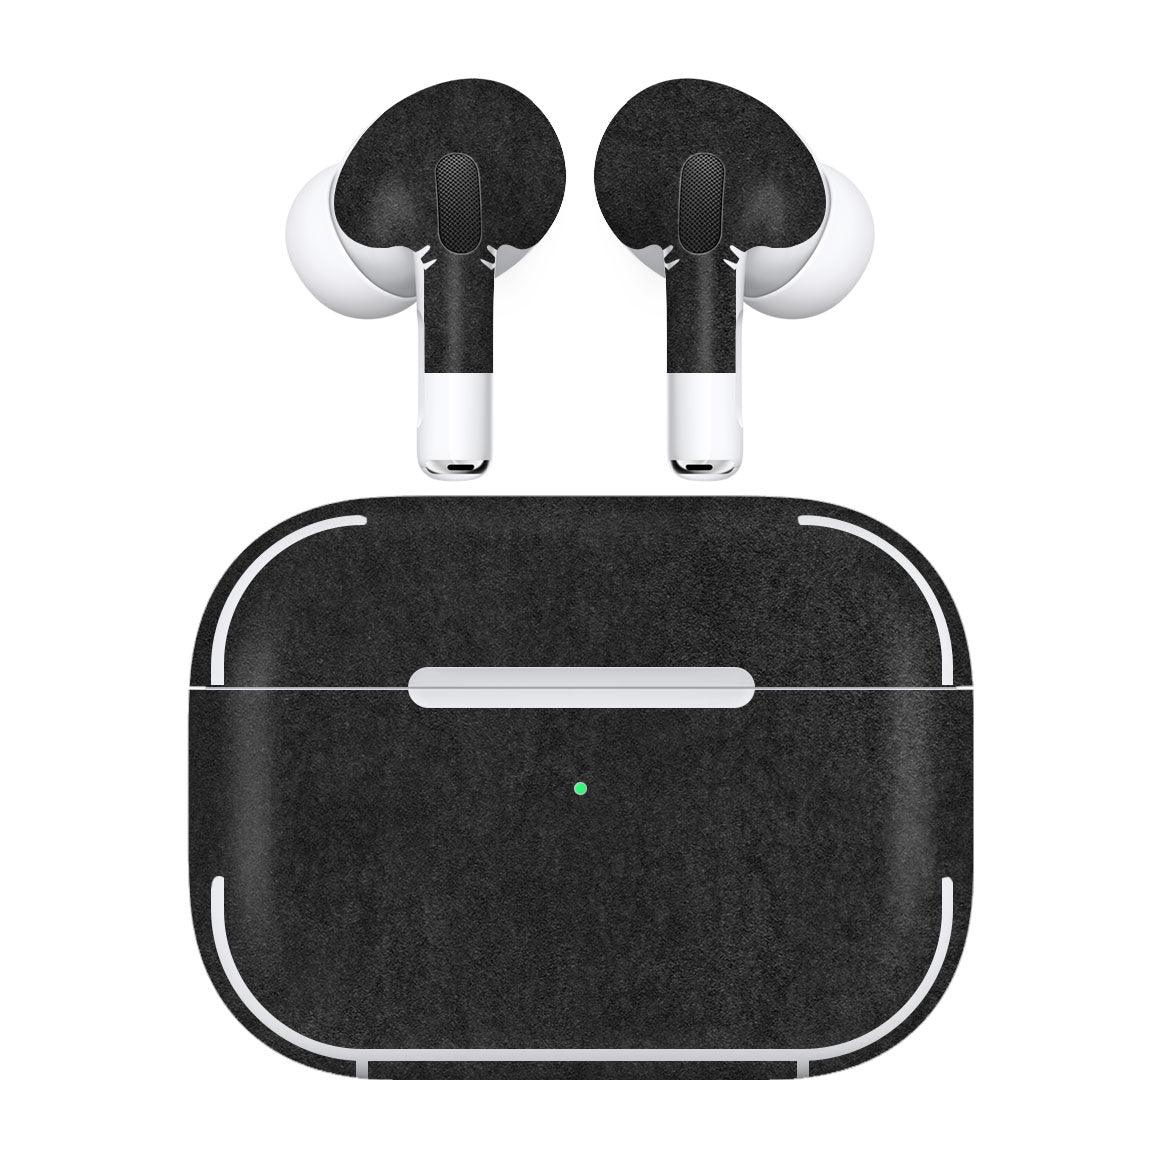 Apple AirPods Gen 3 Skins, Wraps and Covers – Slickwraps